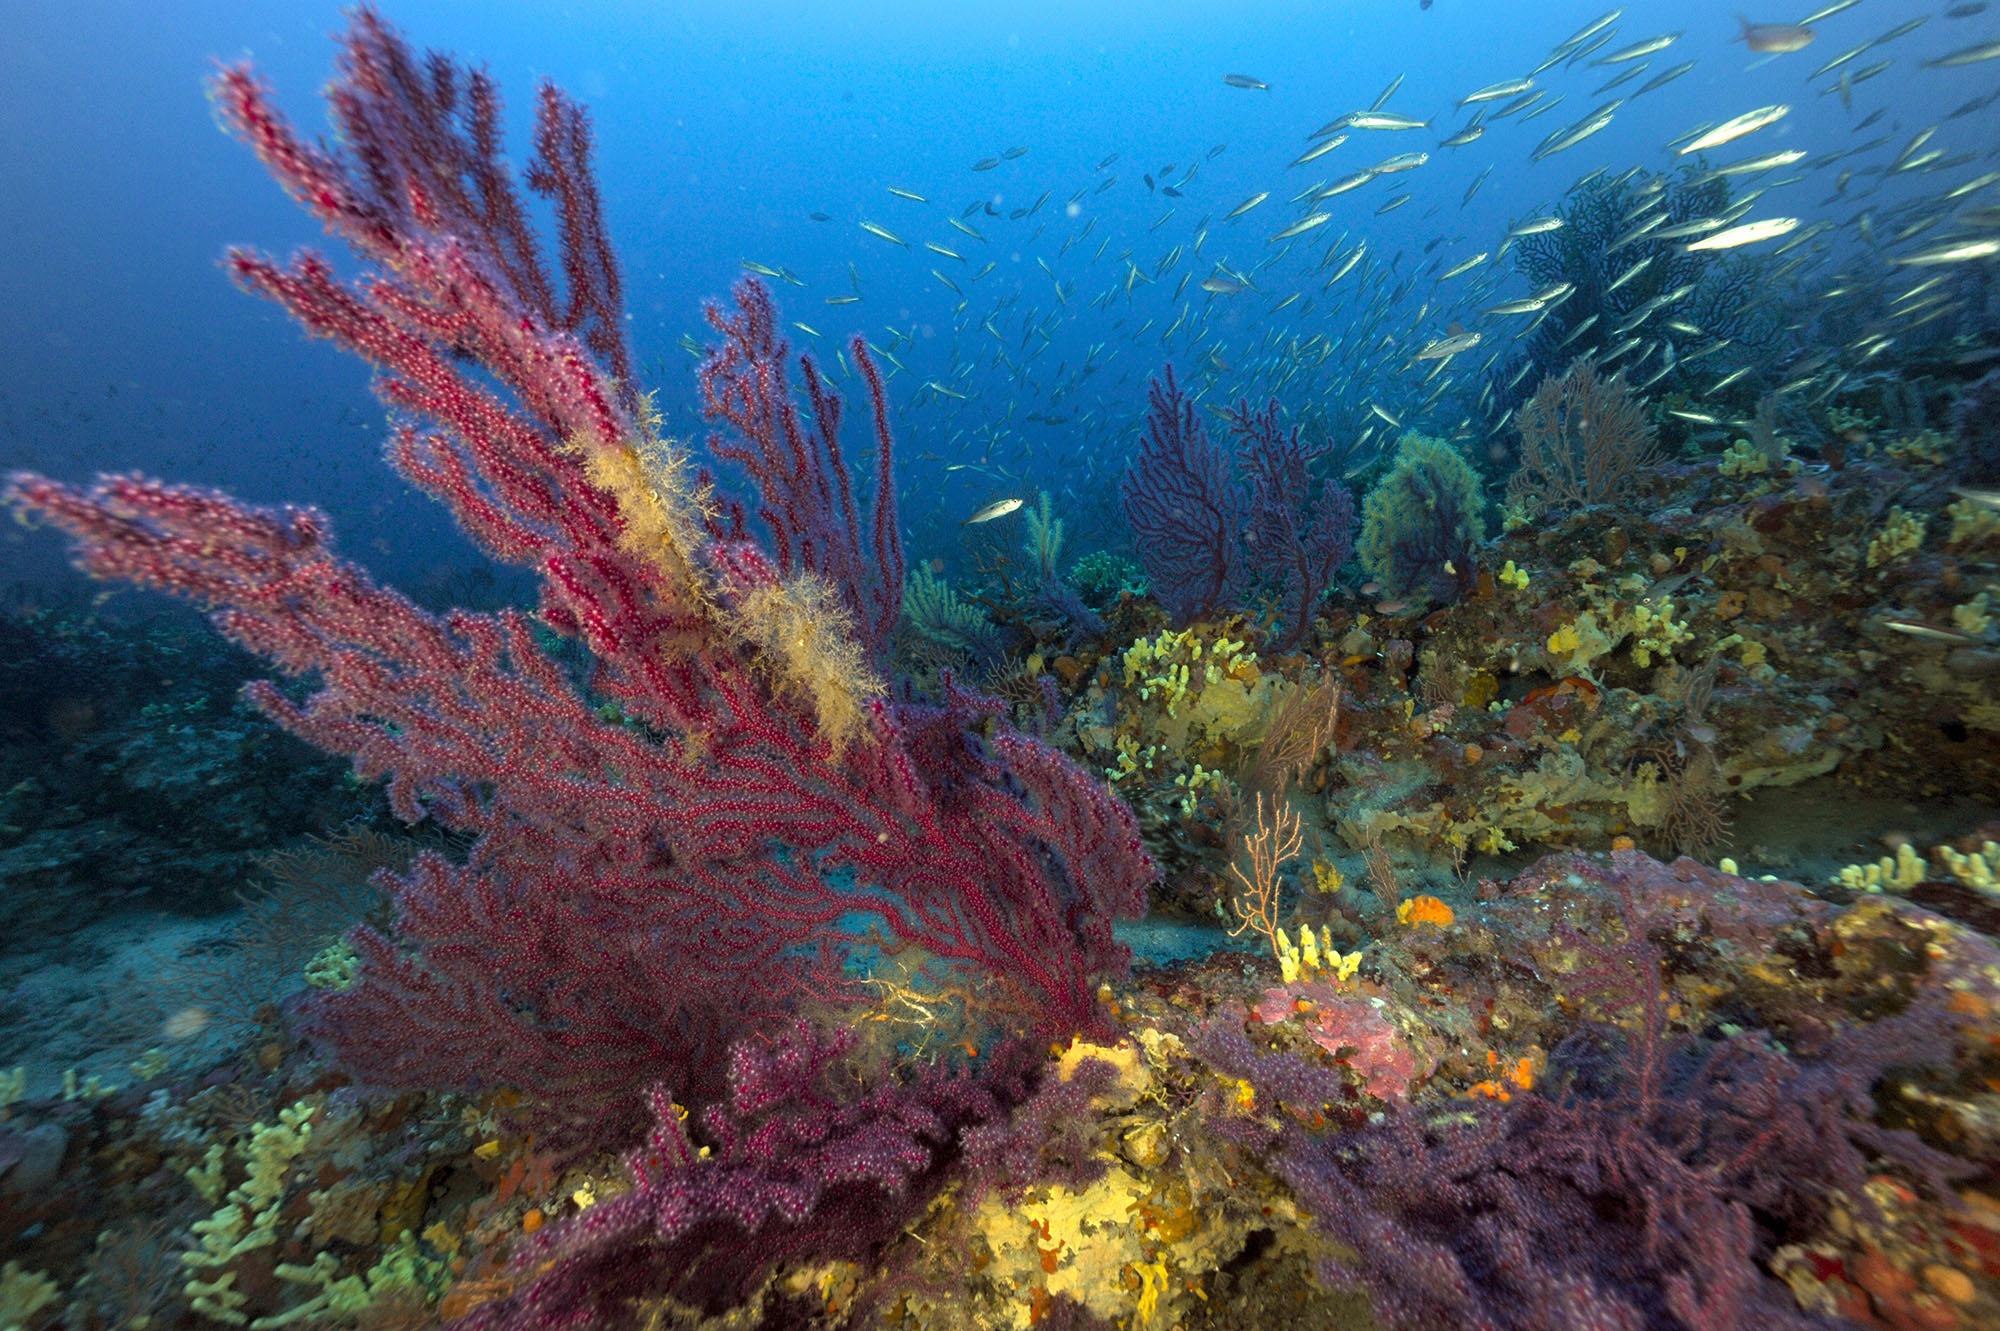 photo of teeming sea life around thriving coral fans and reef biotope